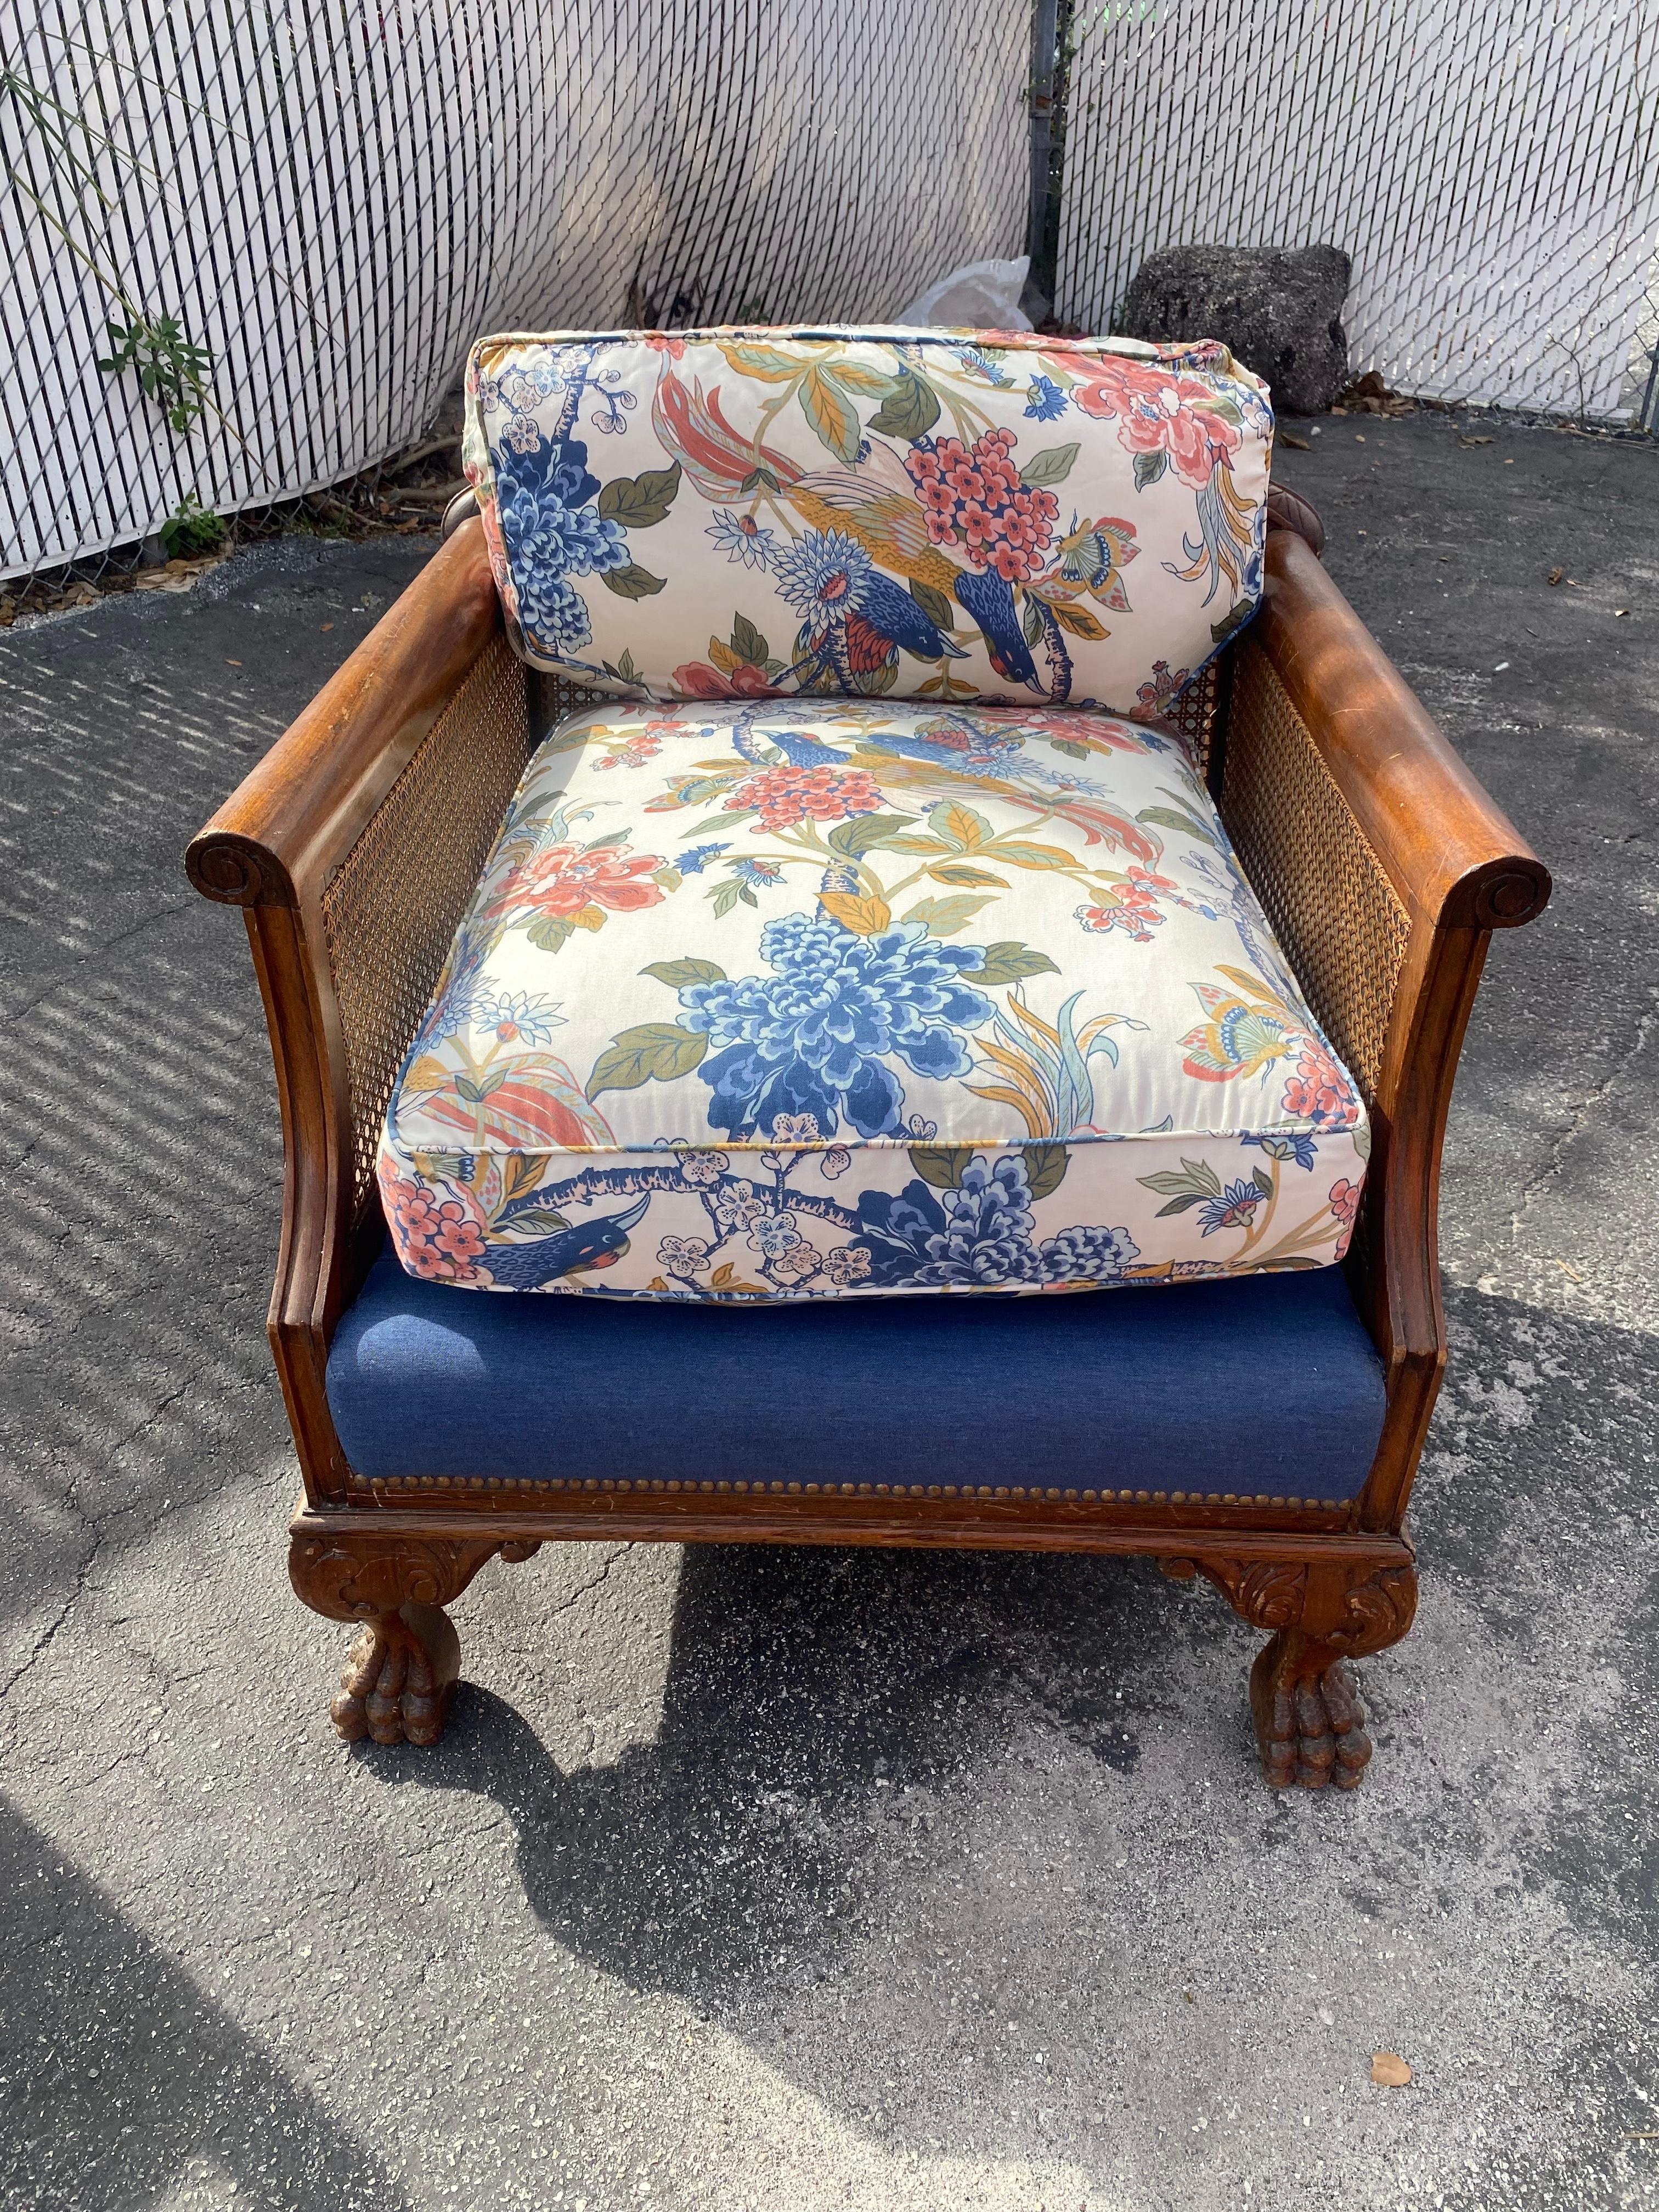 Victorian Down Chinoiserie Carved Wood Claw Rattan Cane Sofa Chairs , Set of 3 In Good Condition For Sale In Fort Lauderdale, FL